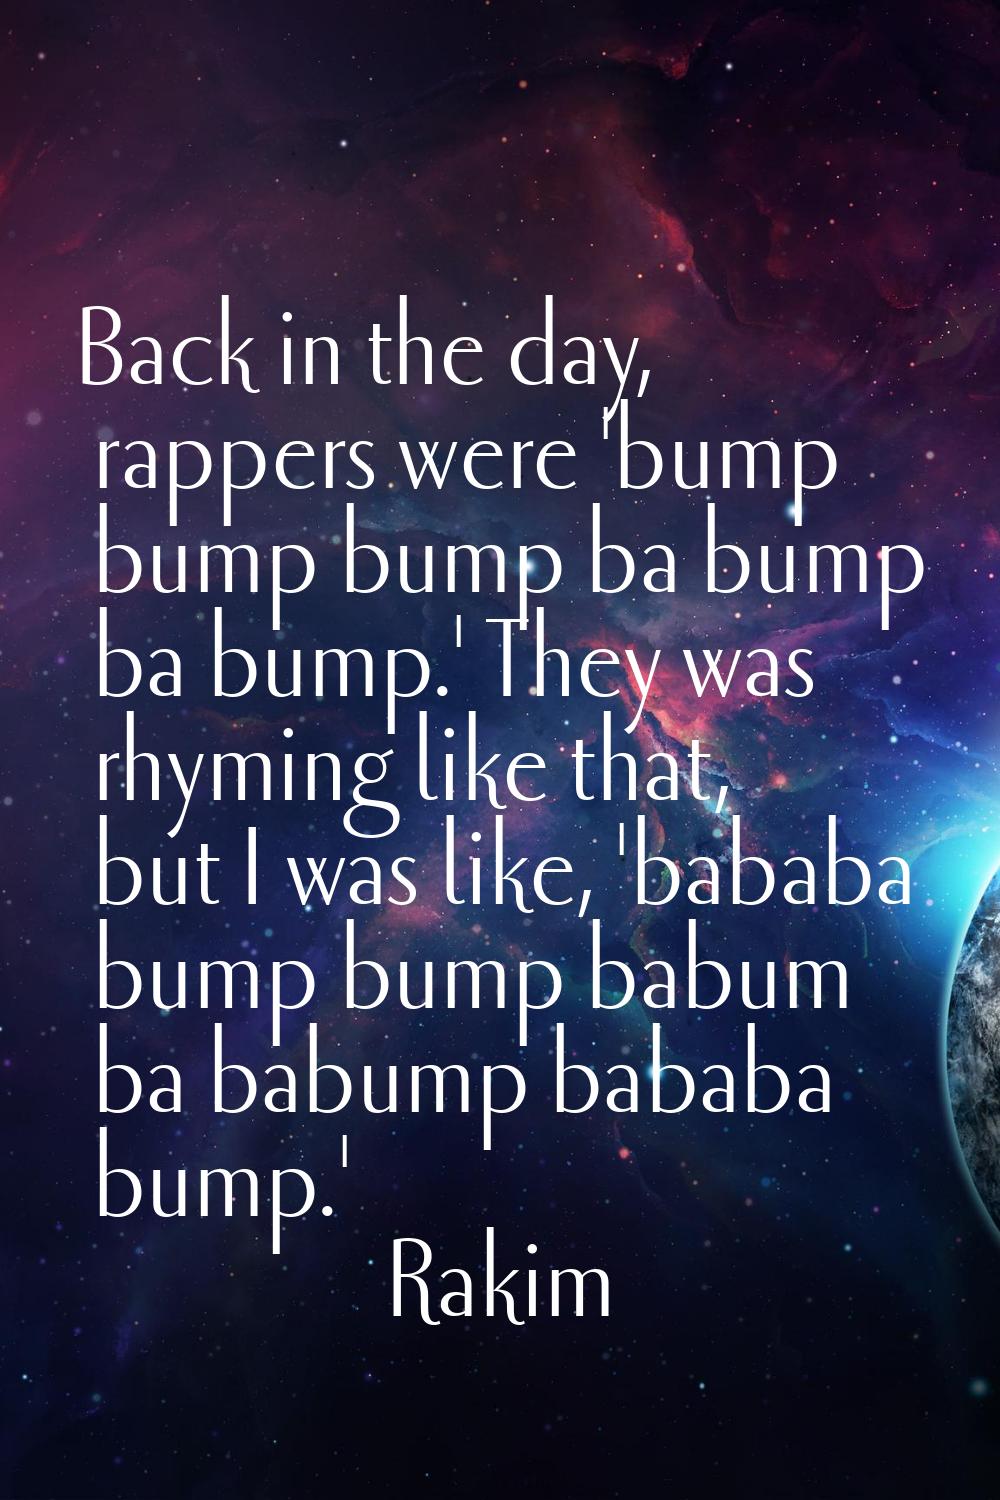 Back in the day, rappers were 'bump bump bump ba bump ba bump.' They was rhyming like that, but I w